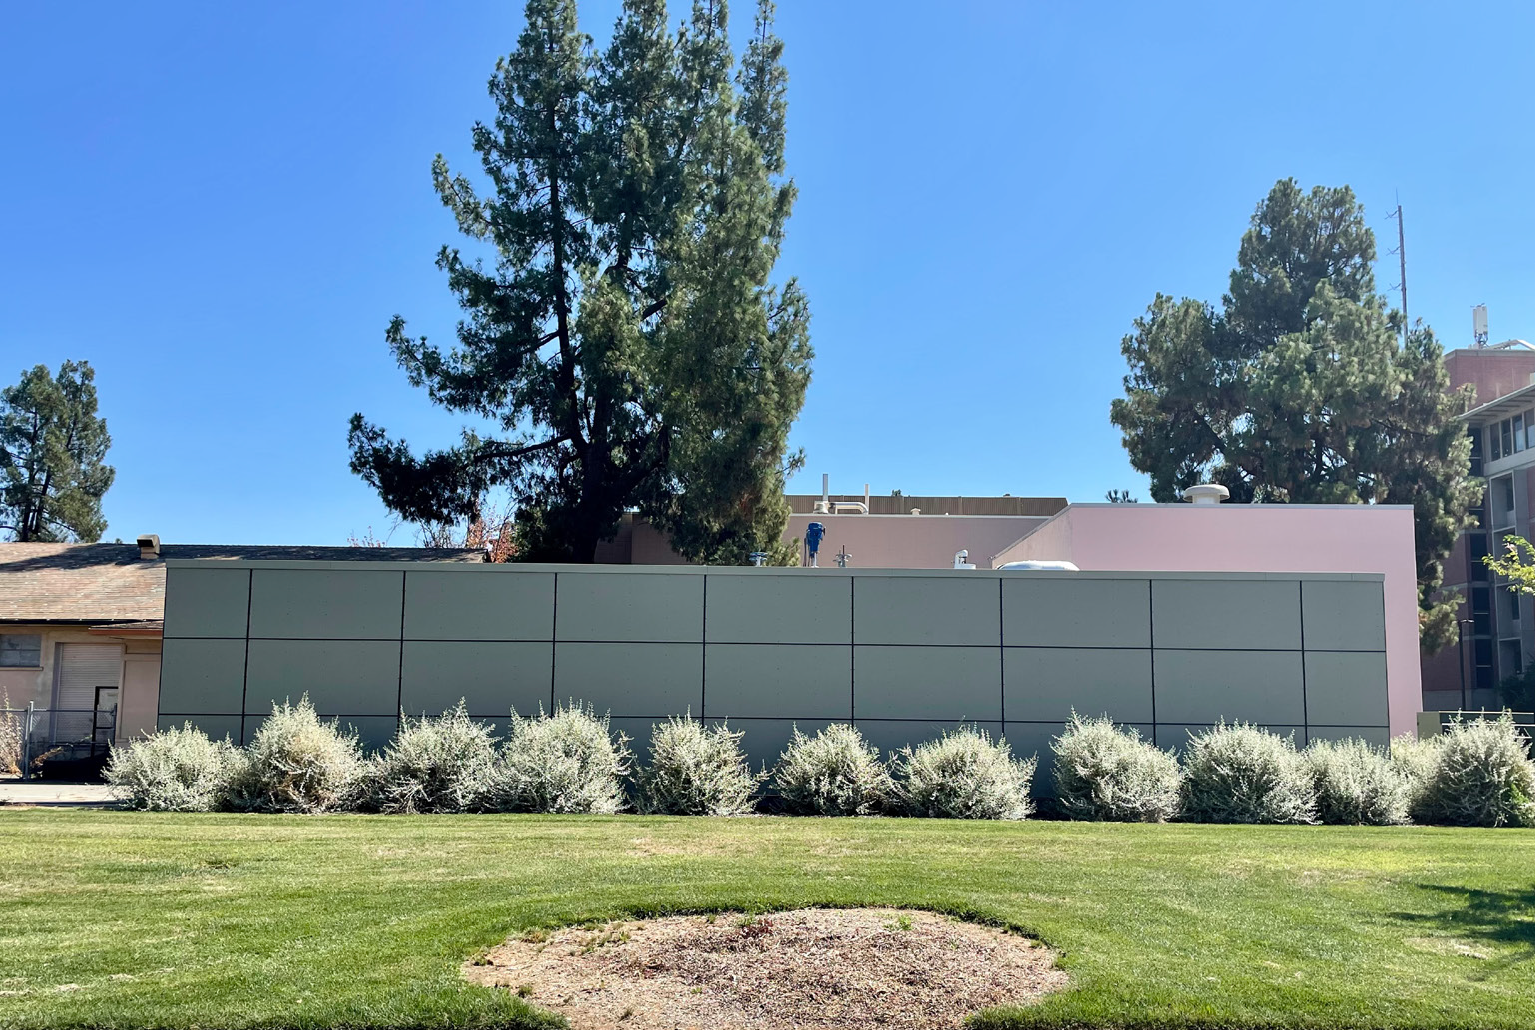 Image of a non-descript building on the UC Davis campus that houses equip vital to the Big Shift, a large-scale construction project essential to facilitating the campus's move away from fossil fuel use in its operations.